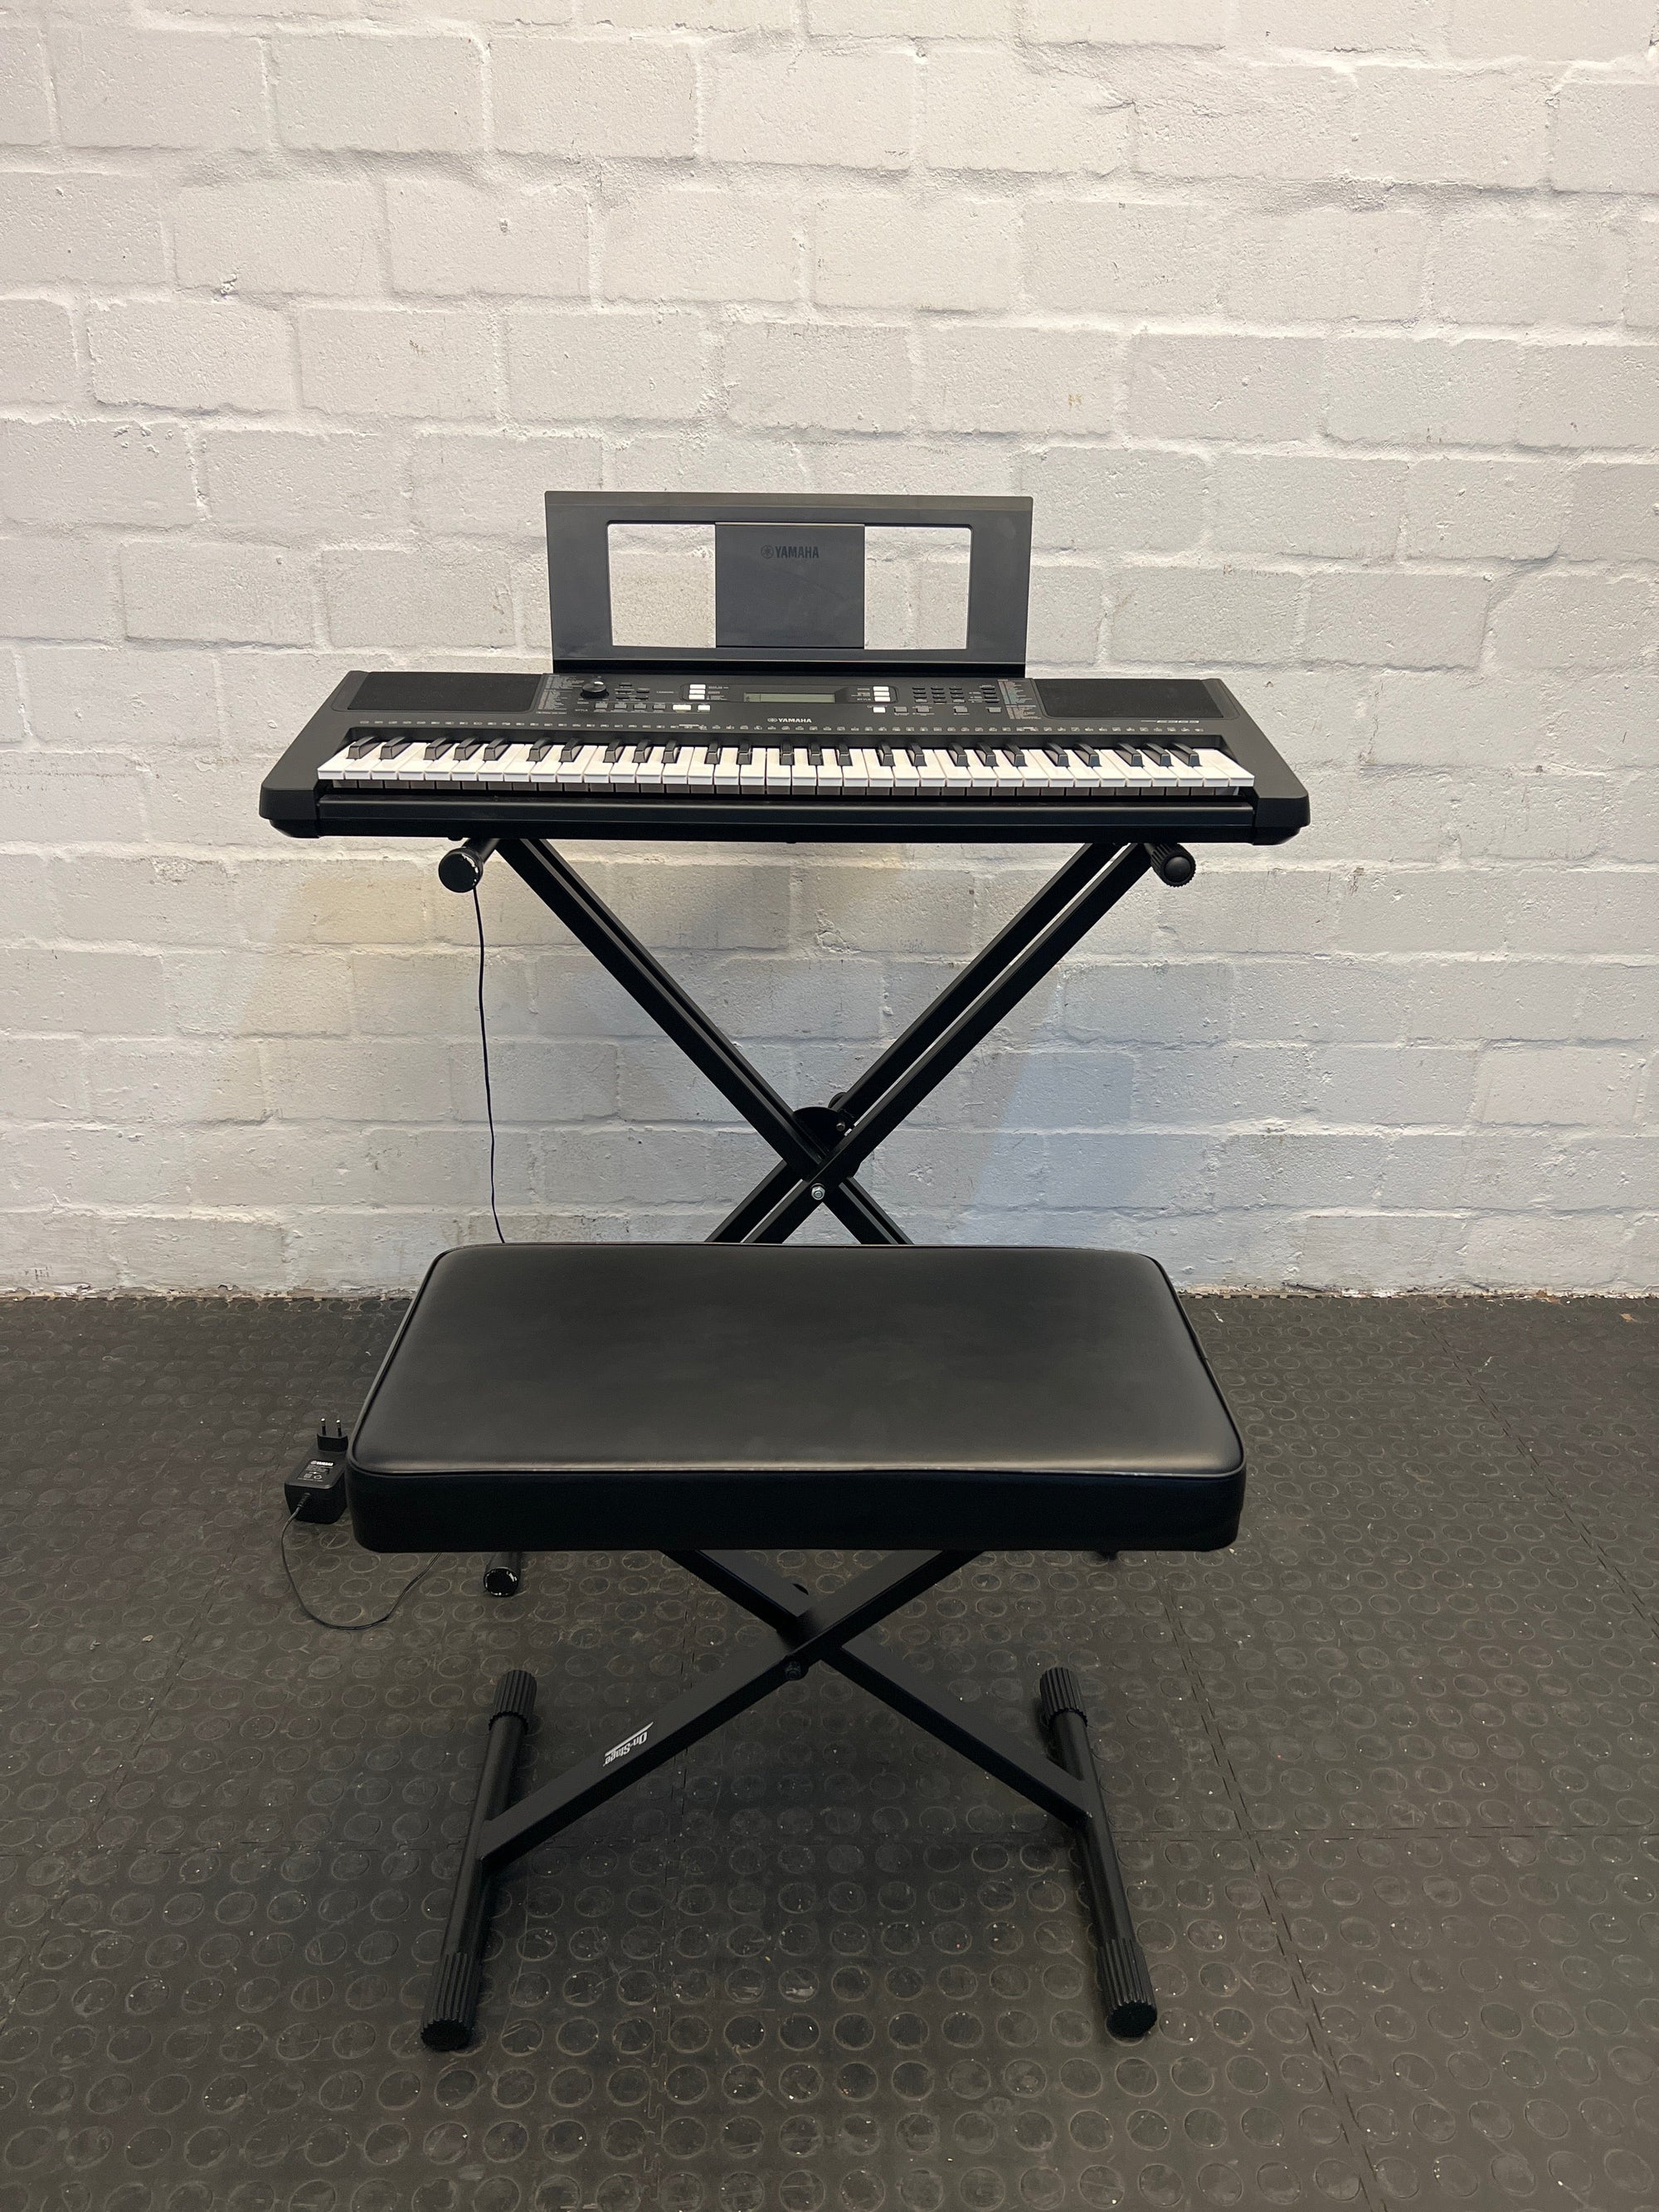 Piano keyboard with Chair